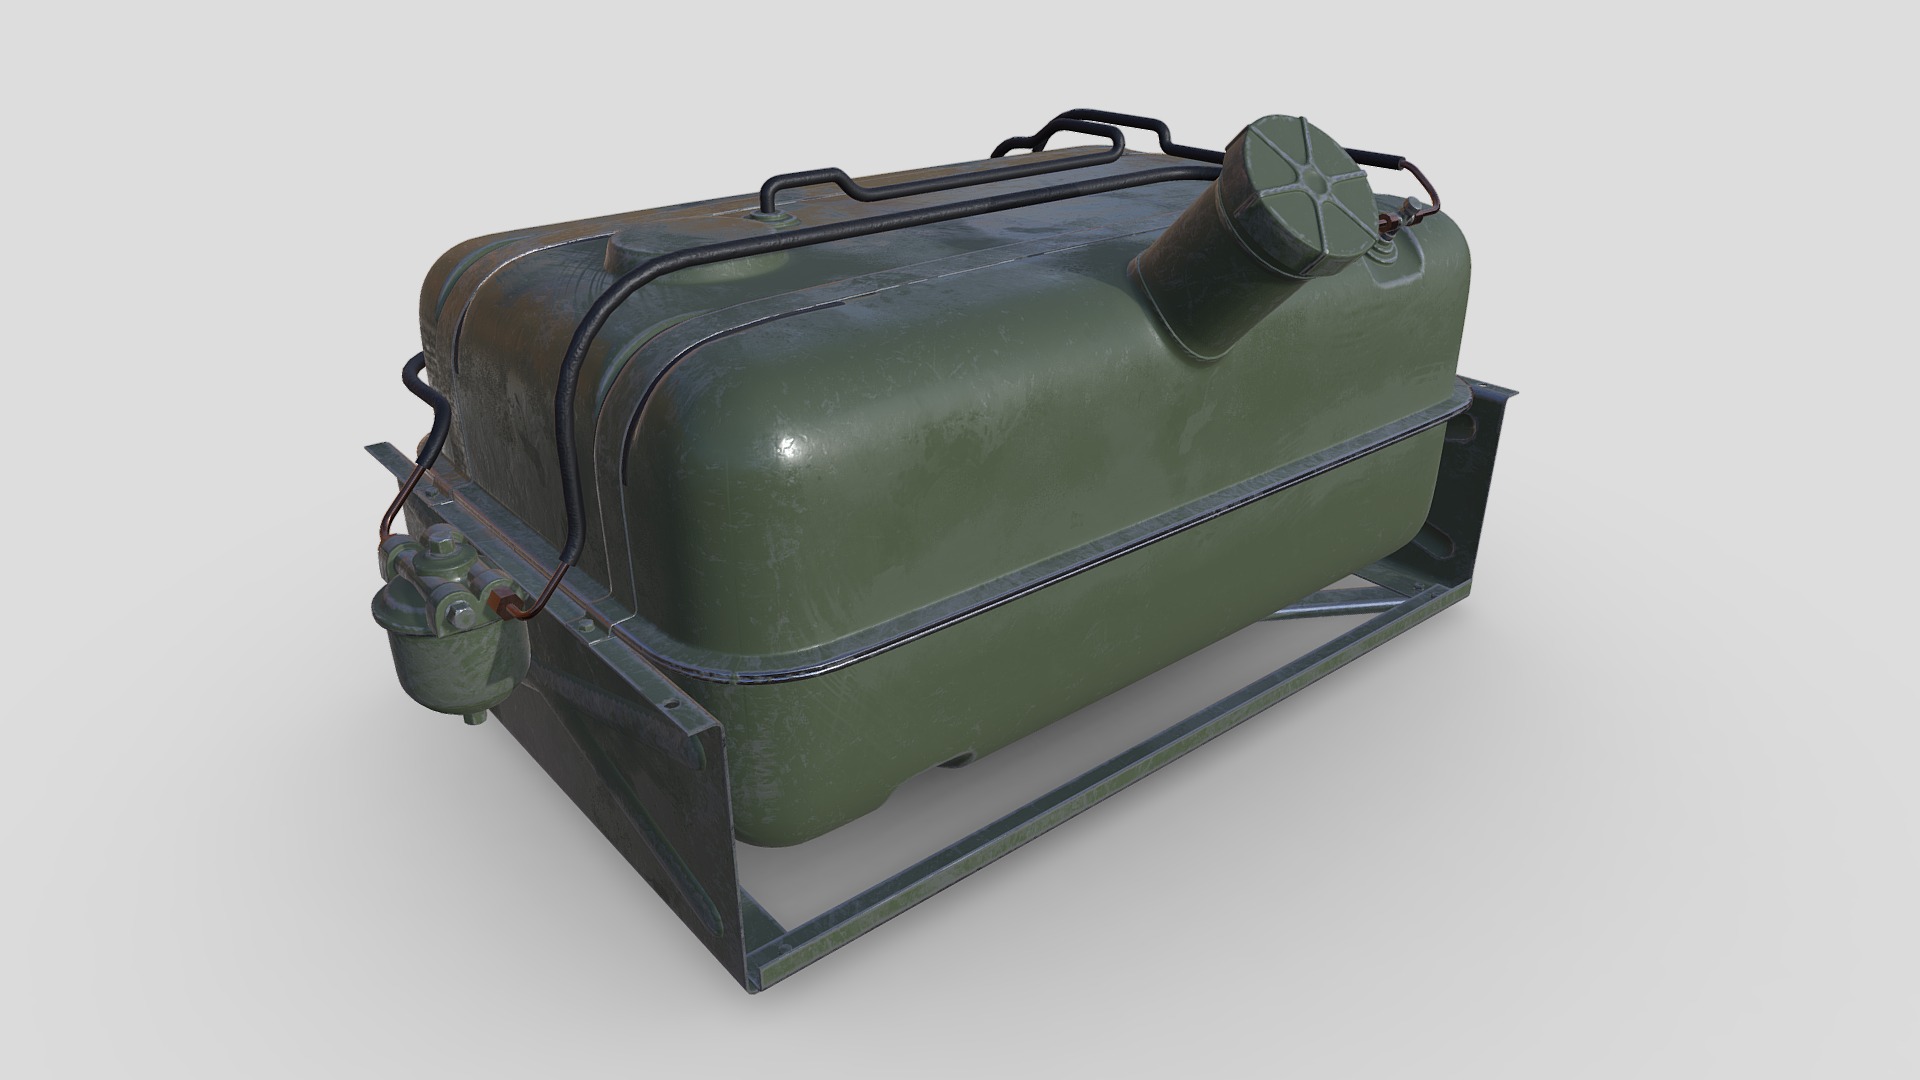 3D model ZIL 157 Fuel tank_Almost new - This is a 3D model of the ZIL 157 Fuel tank_Almost new. The 3D model is about a green suitcase with a handle.